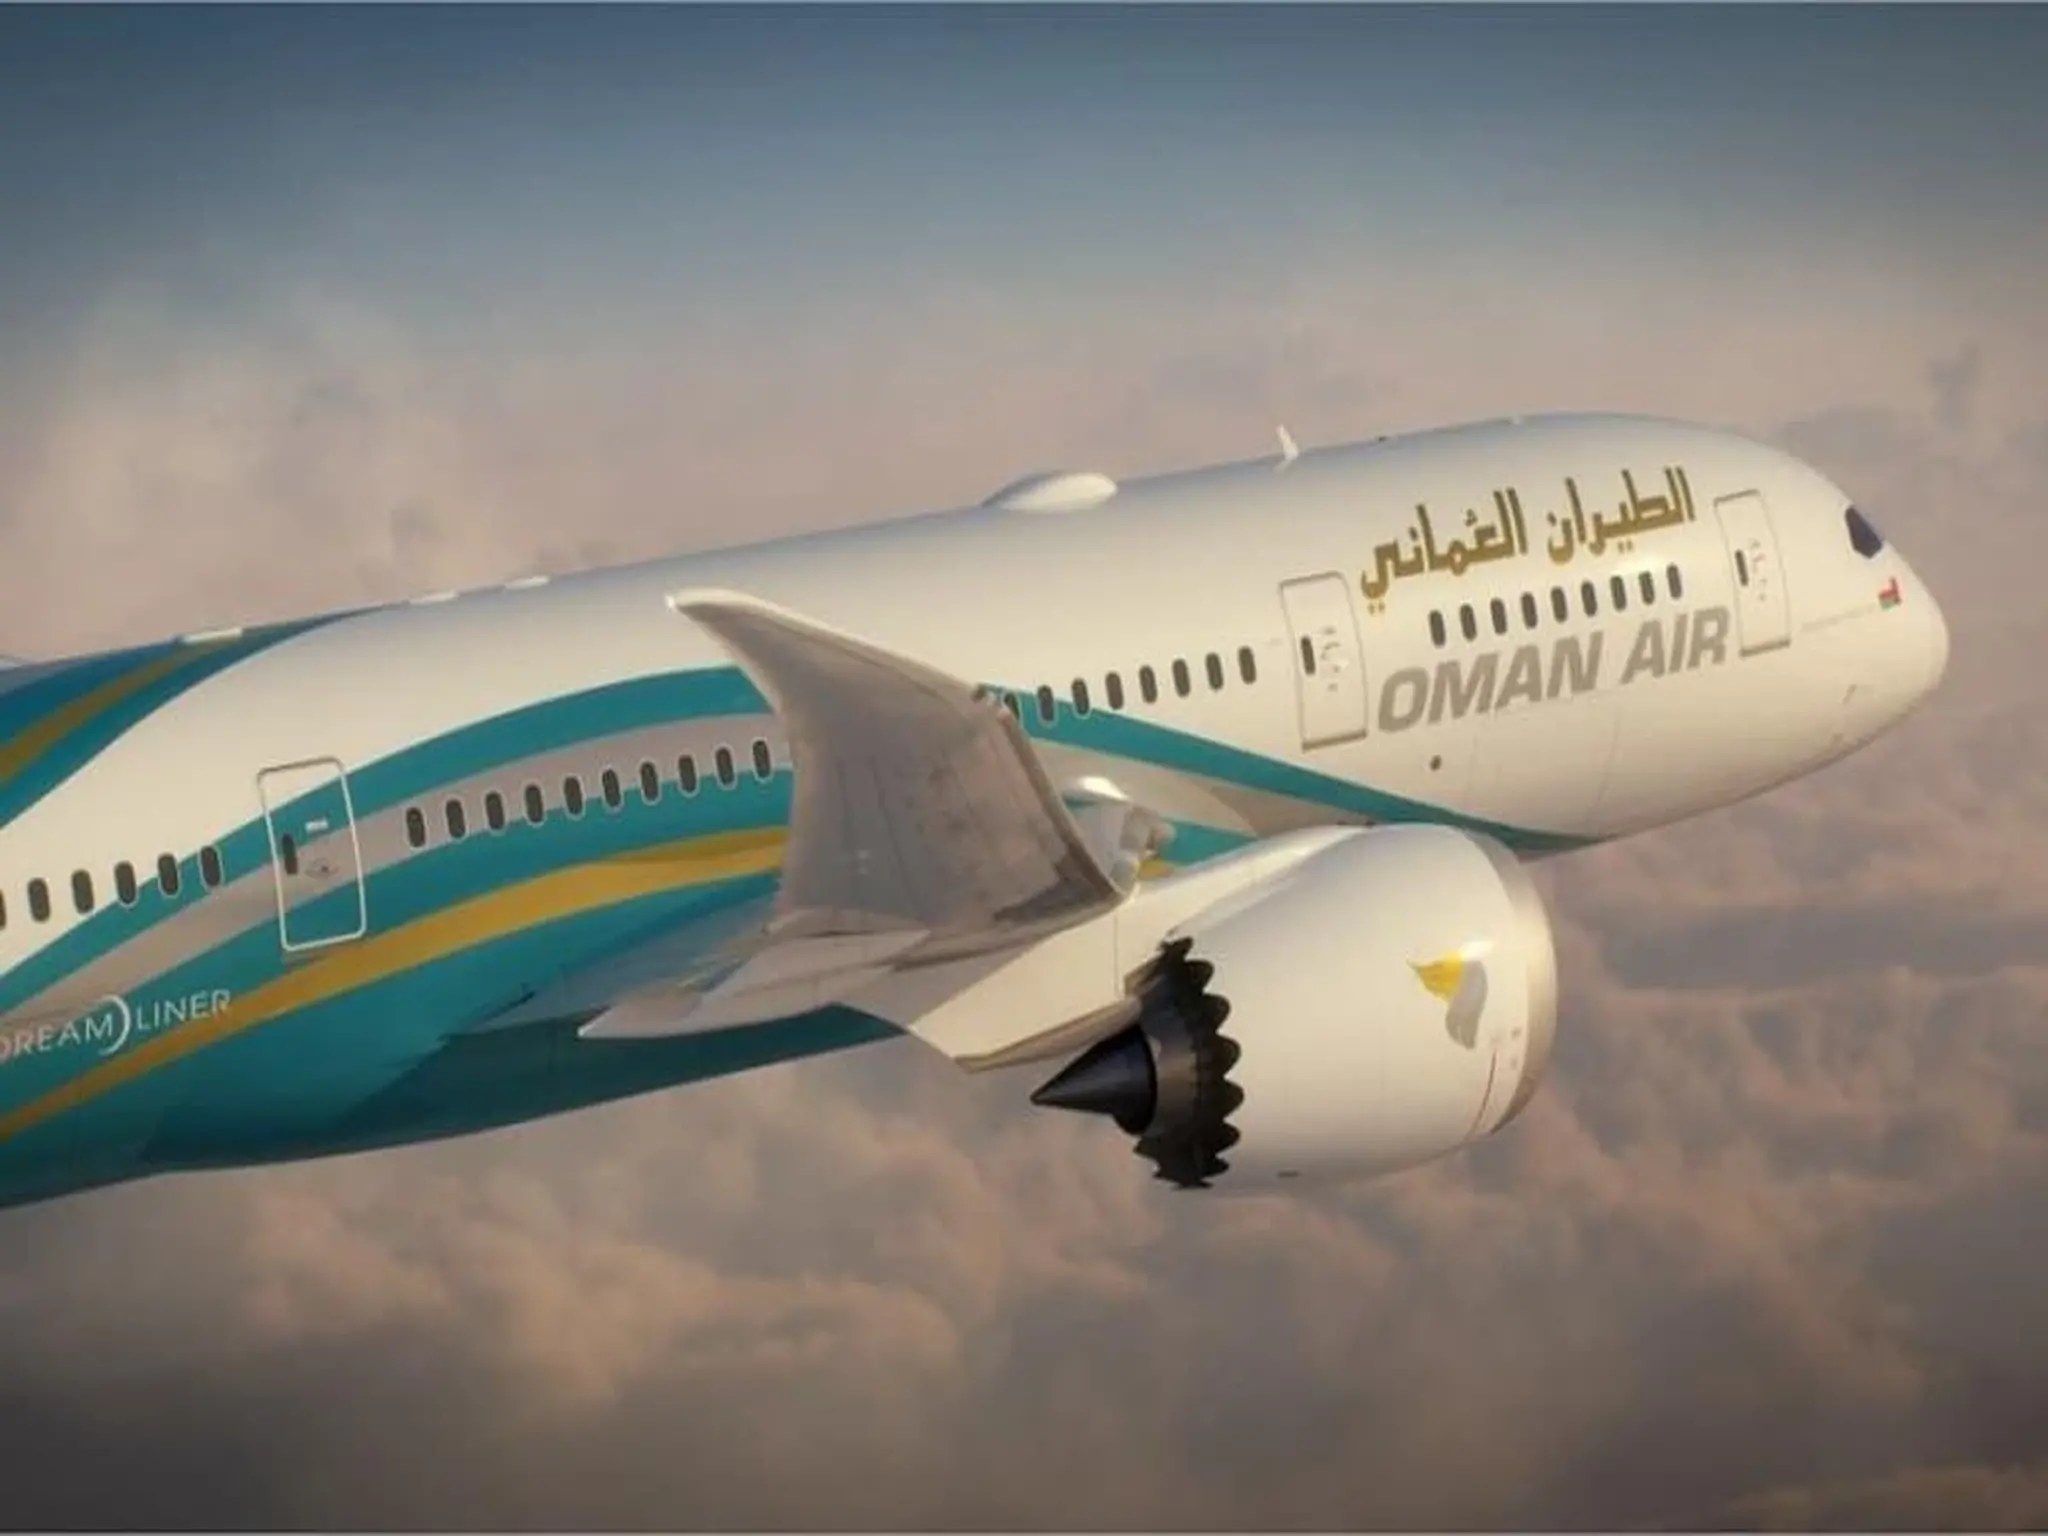 Oman Air announces the cancellation of some flights